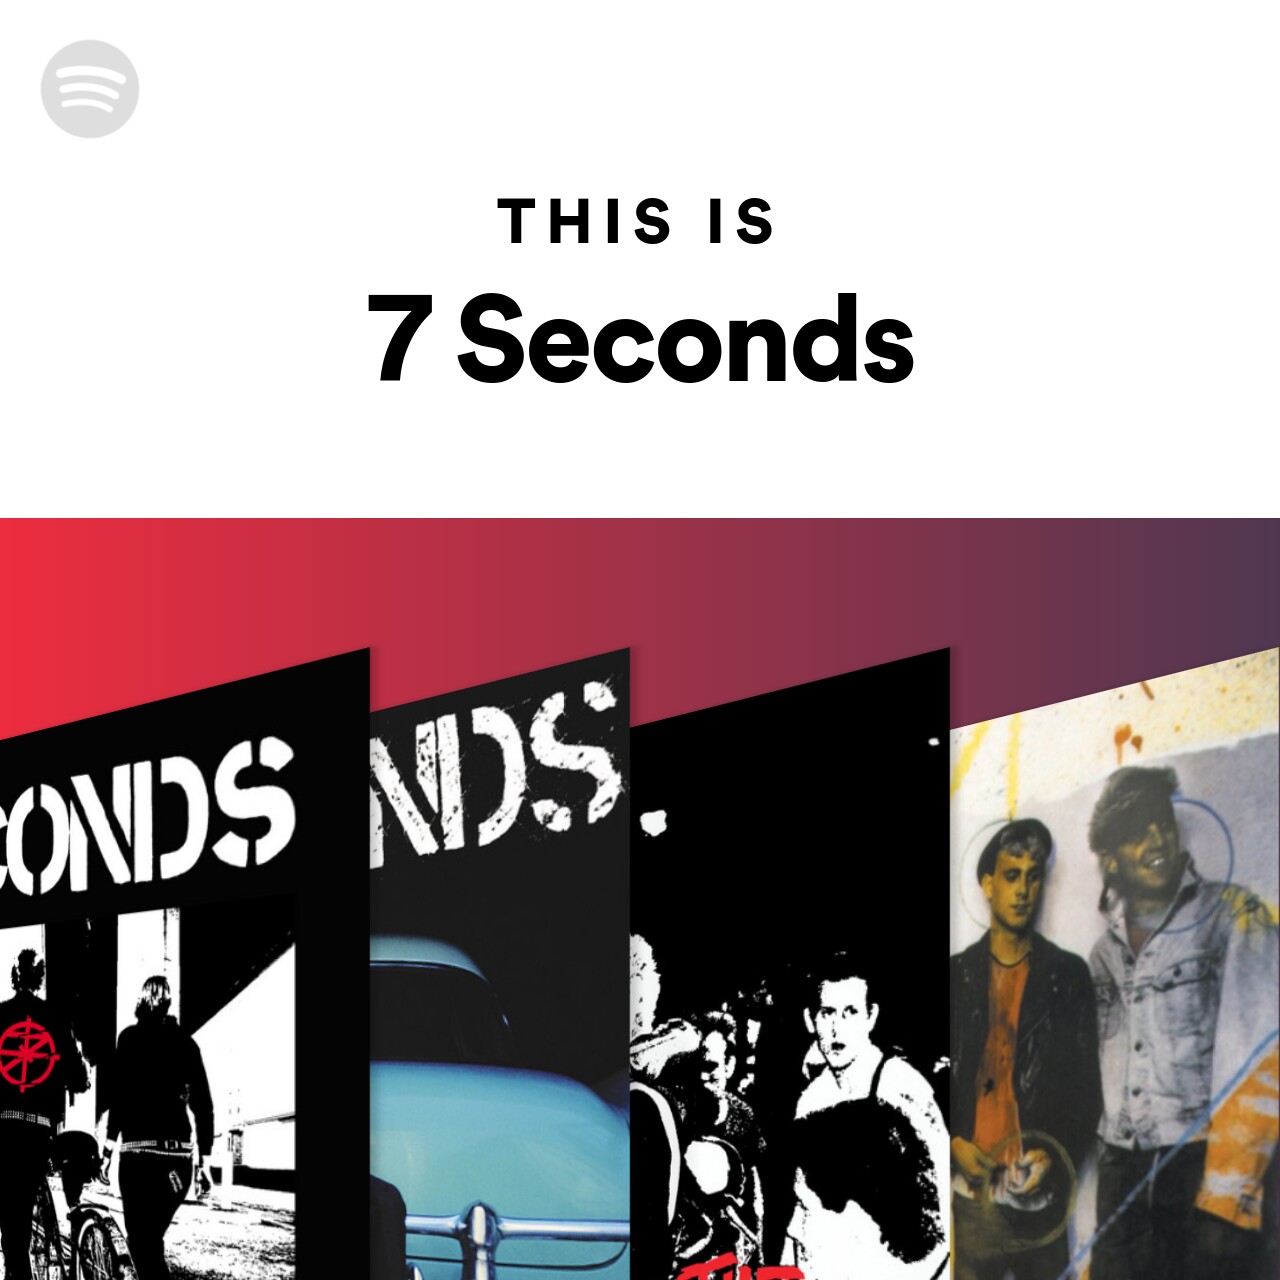 This Is 7 Seconds